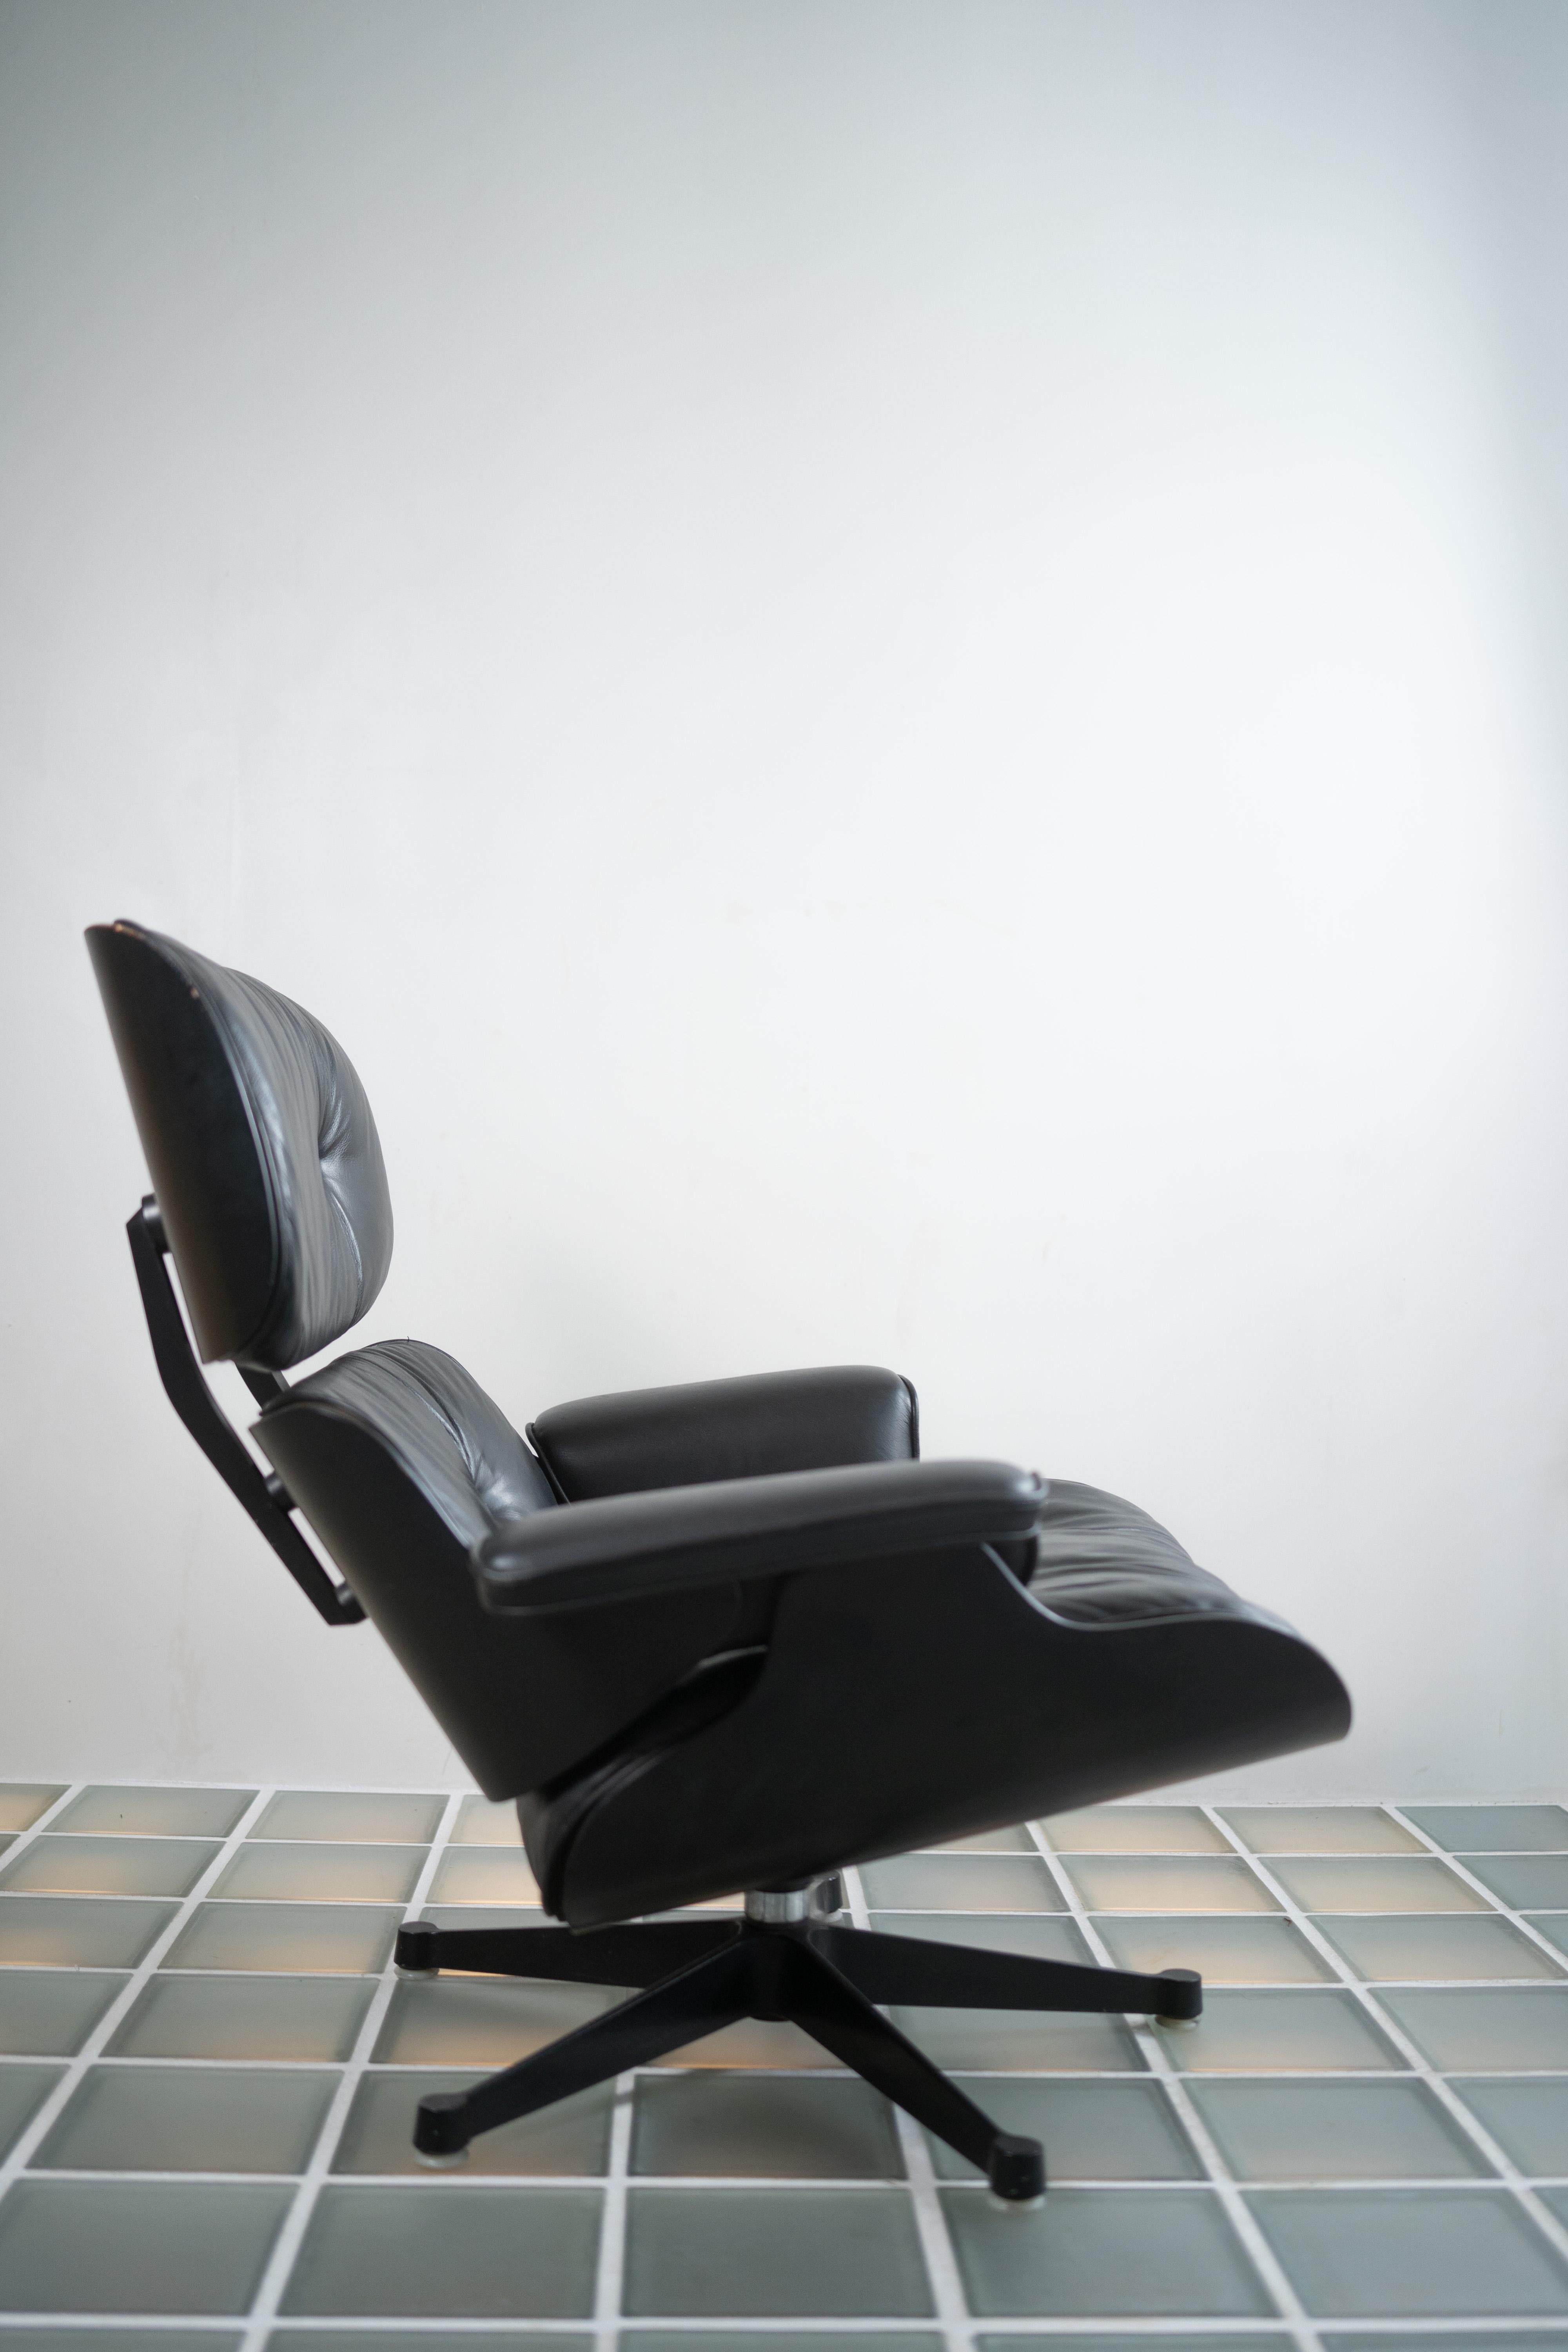 Late 20th Century Lounge Chair by Charles and Ray Eames for Herman Miller